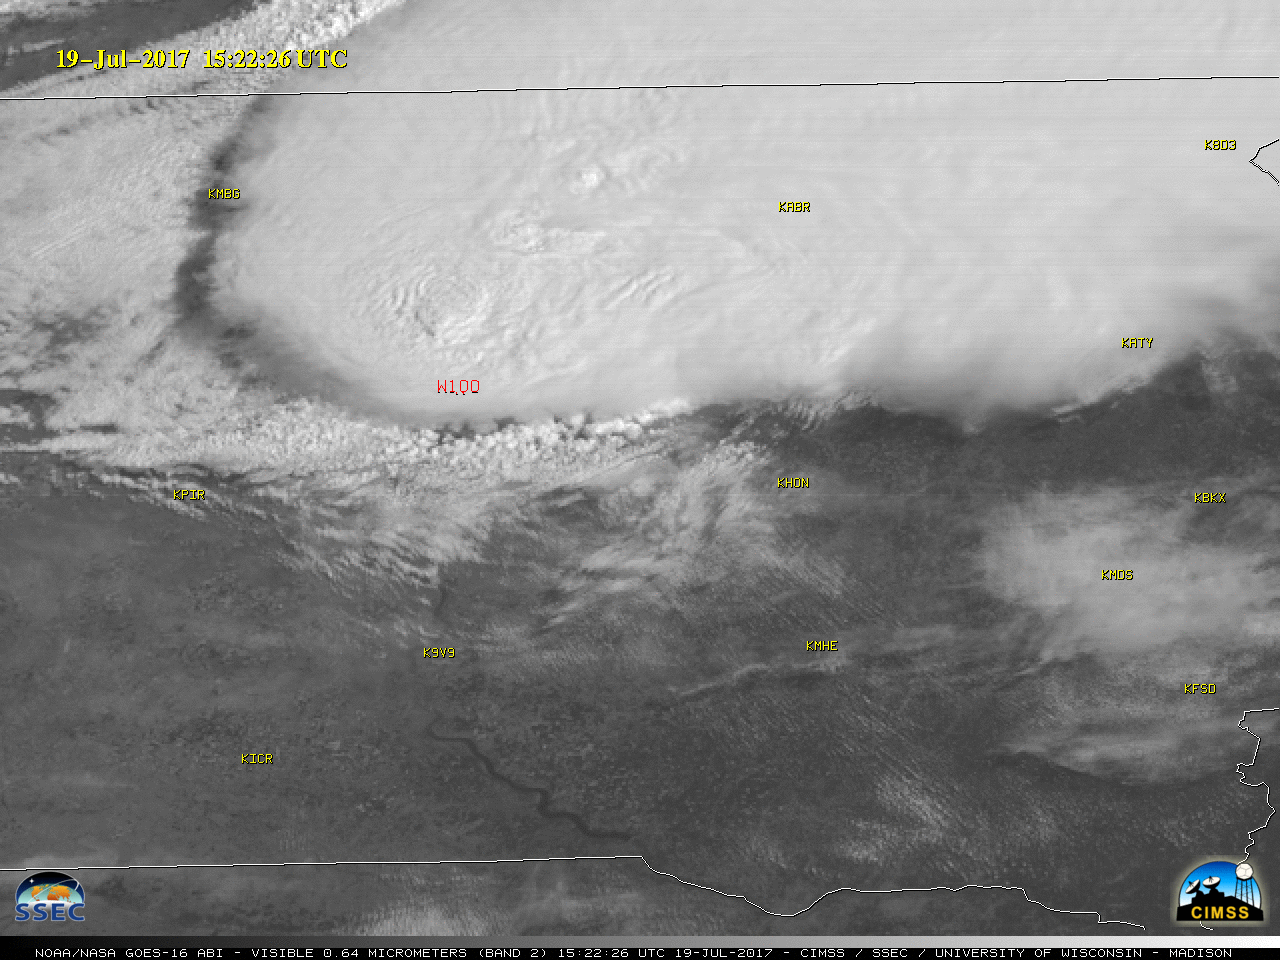 GOES-16 Visible (0.64 µm) images, with SPC storm reports plotted in red [click to play MP4 animation]